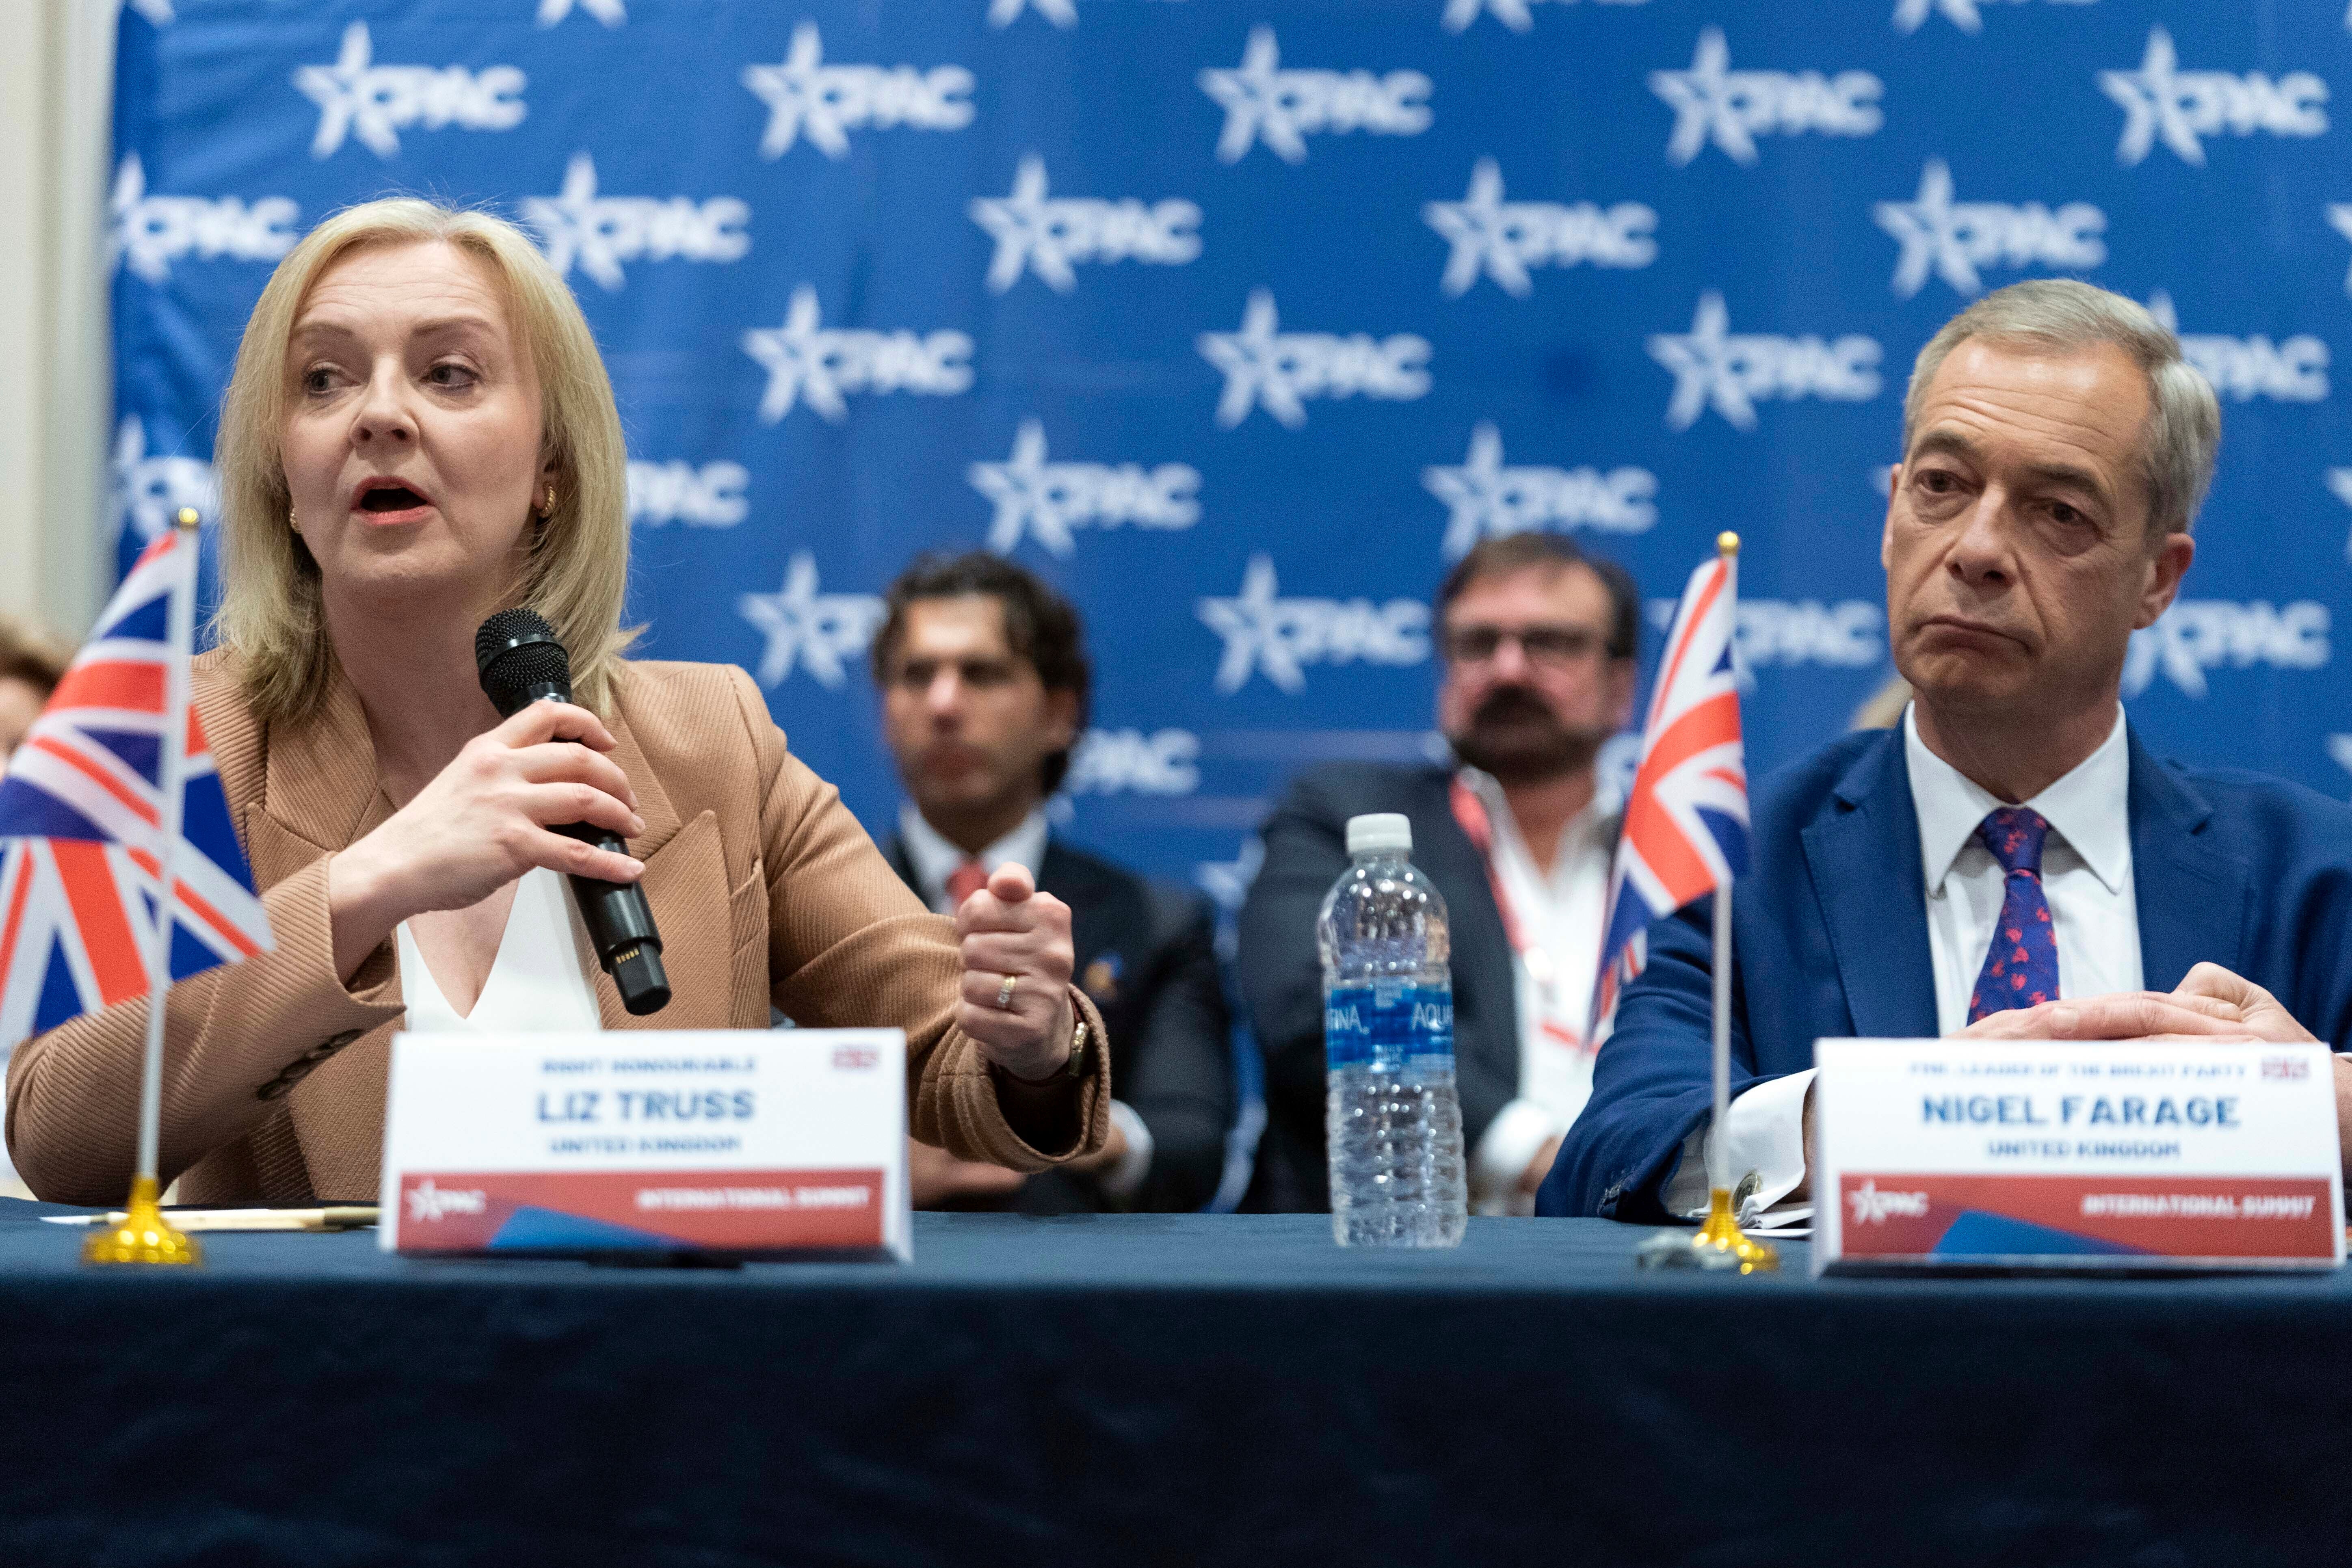 Former UK prime minister Liz Truss and ex-Brexit Party leader Nigel Farage at CPAC in Washington DC